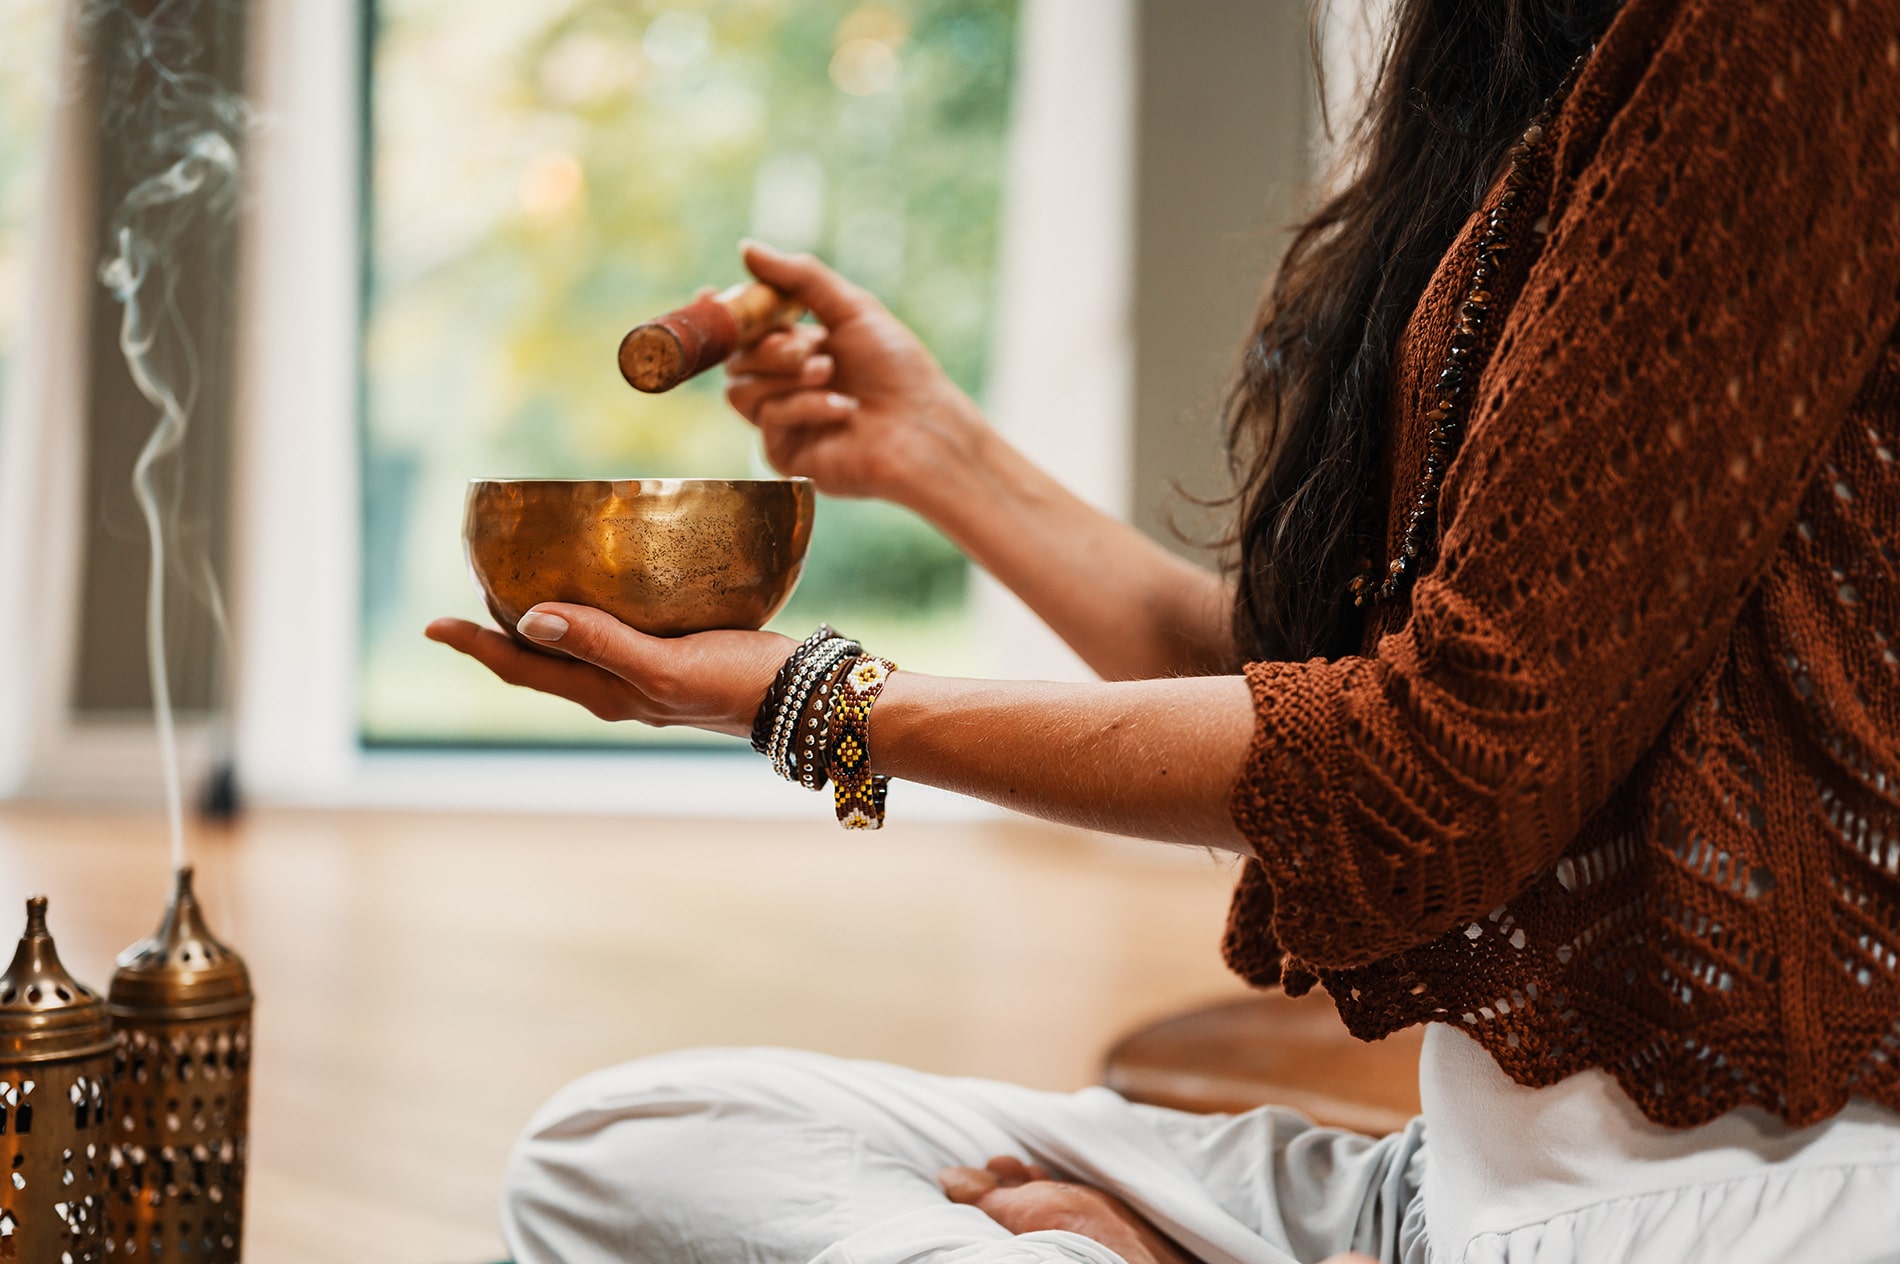 How To Do Meditation For Anxiety And Panic